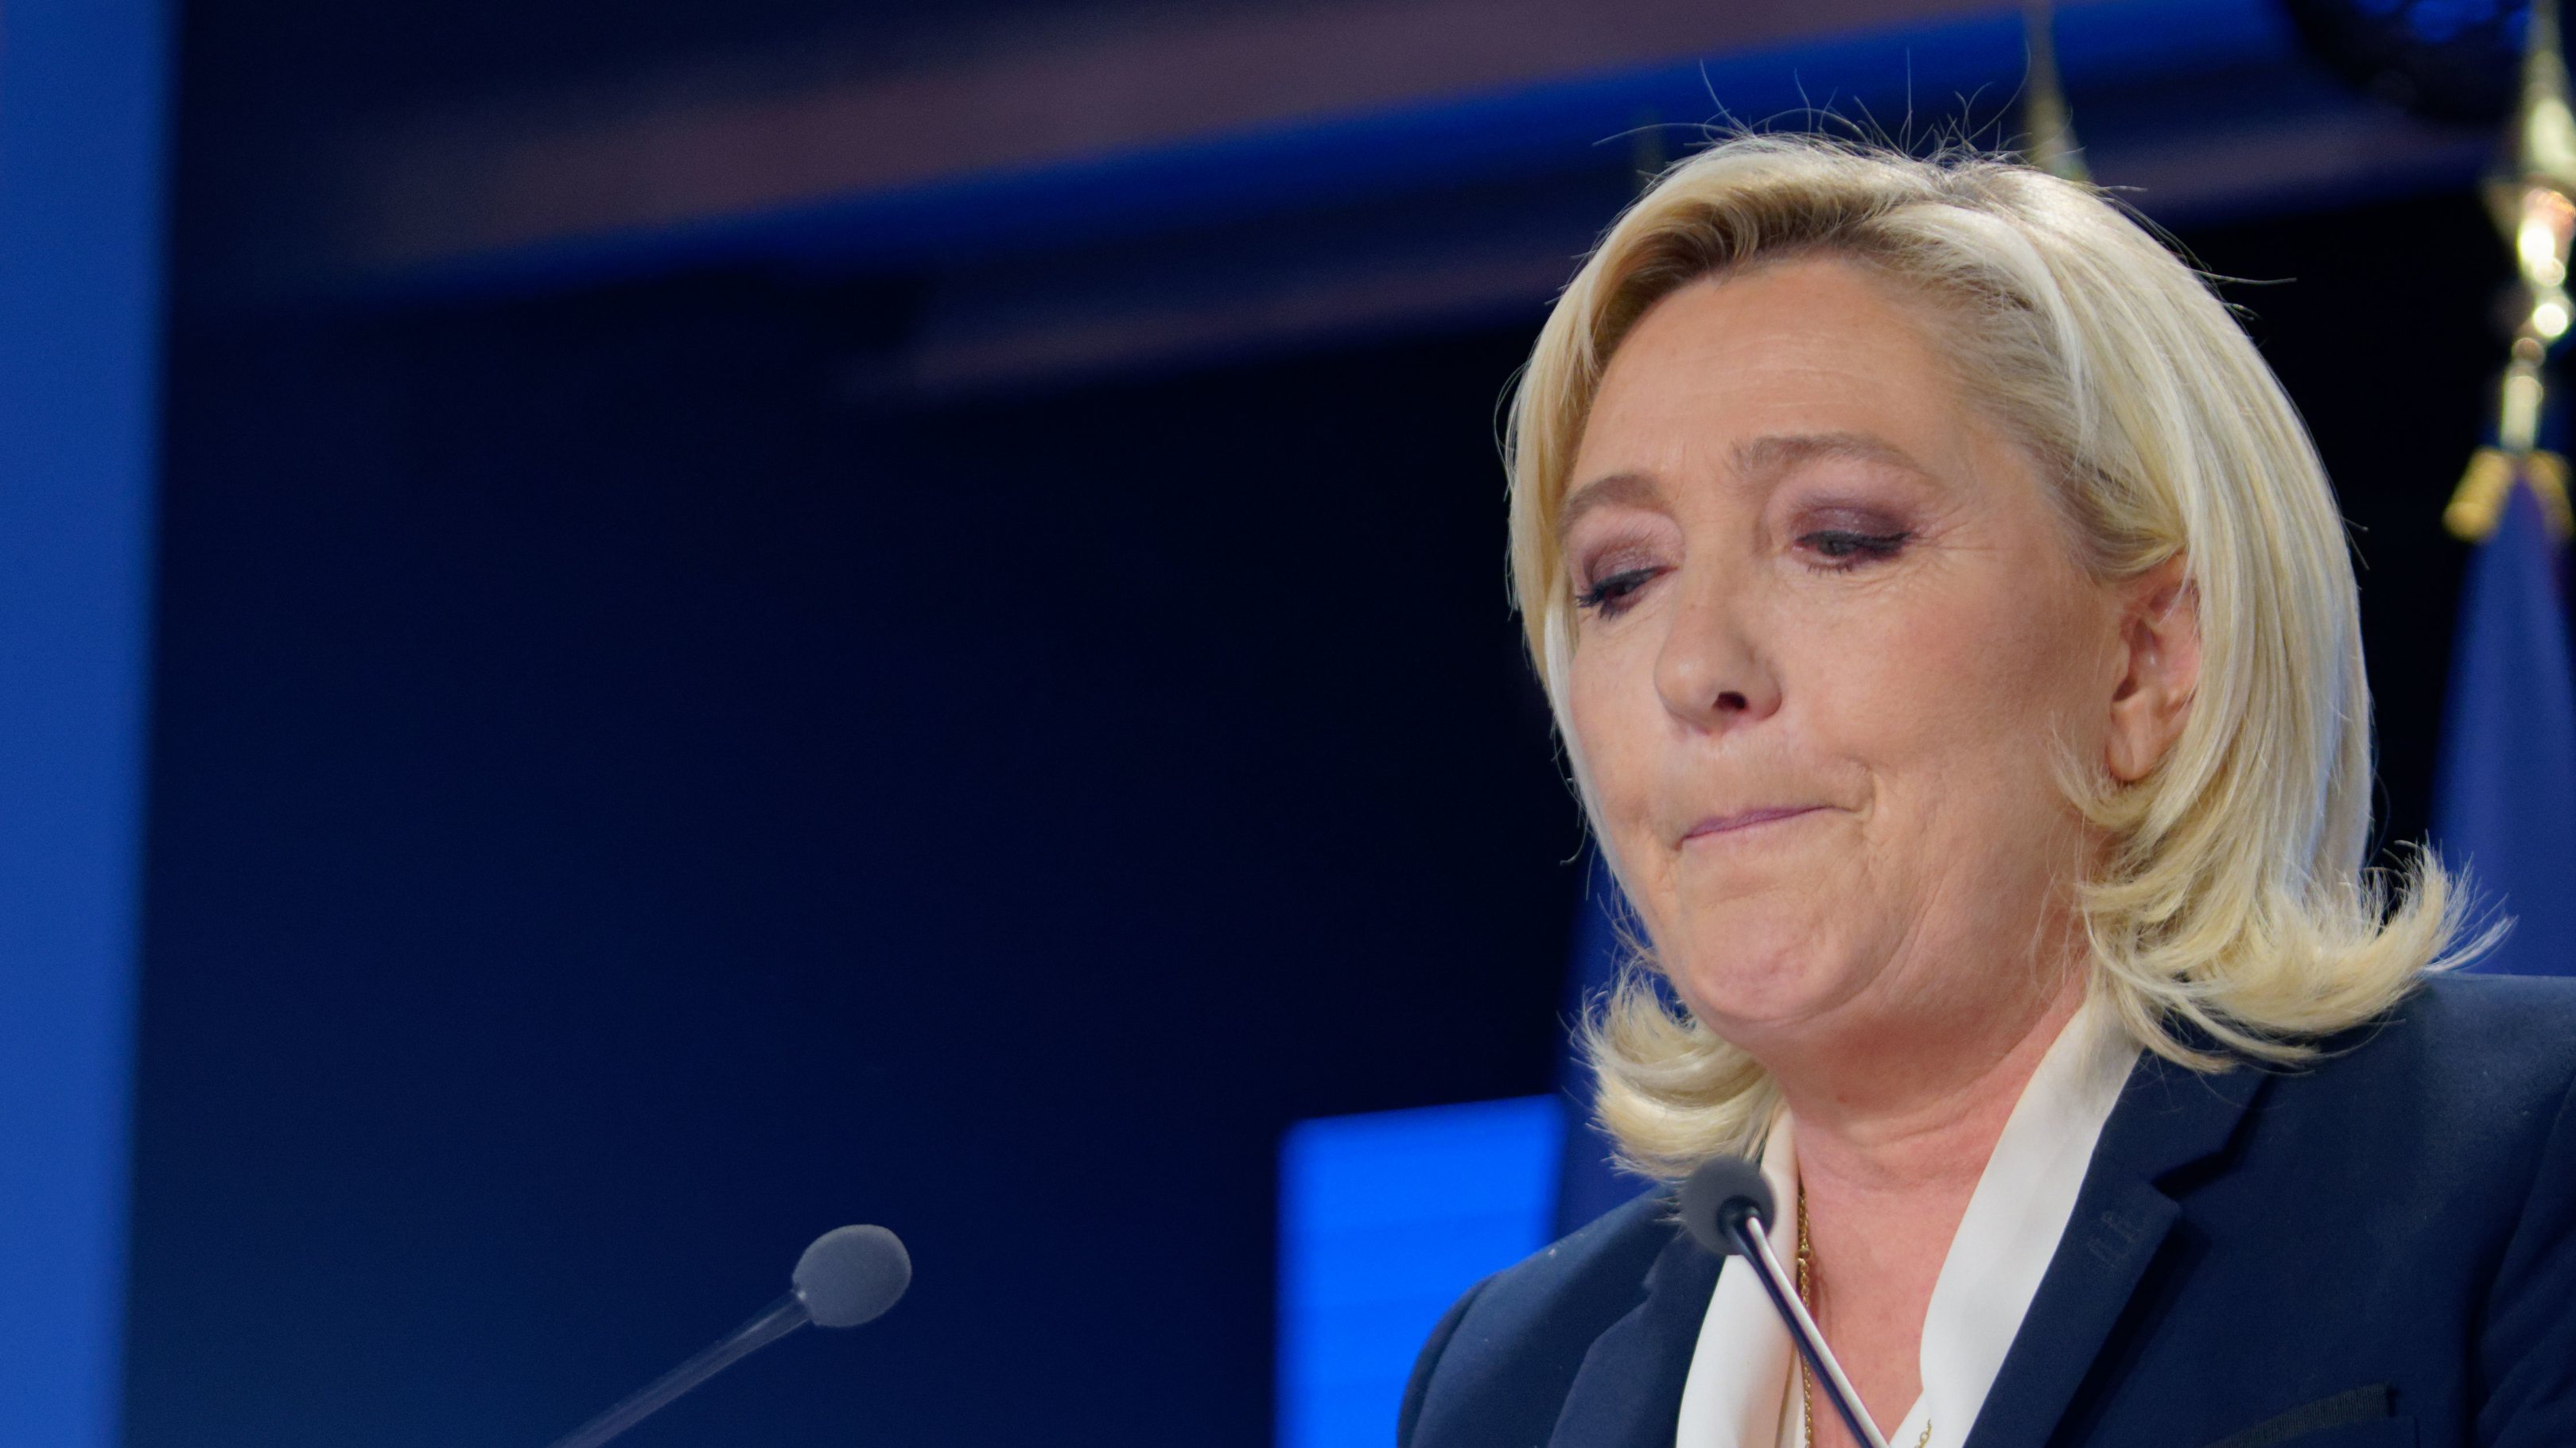 Election Night With Marine Le Pen&#039;s Rassemblement Nationale Party For France&#039;s 2022 Presidential Race Results